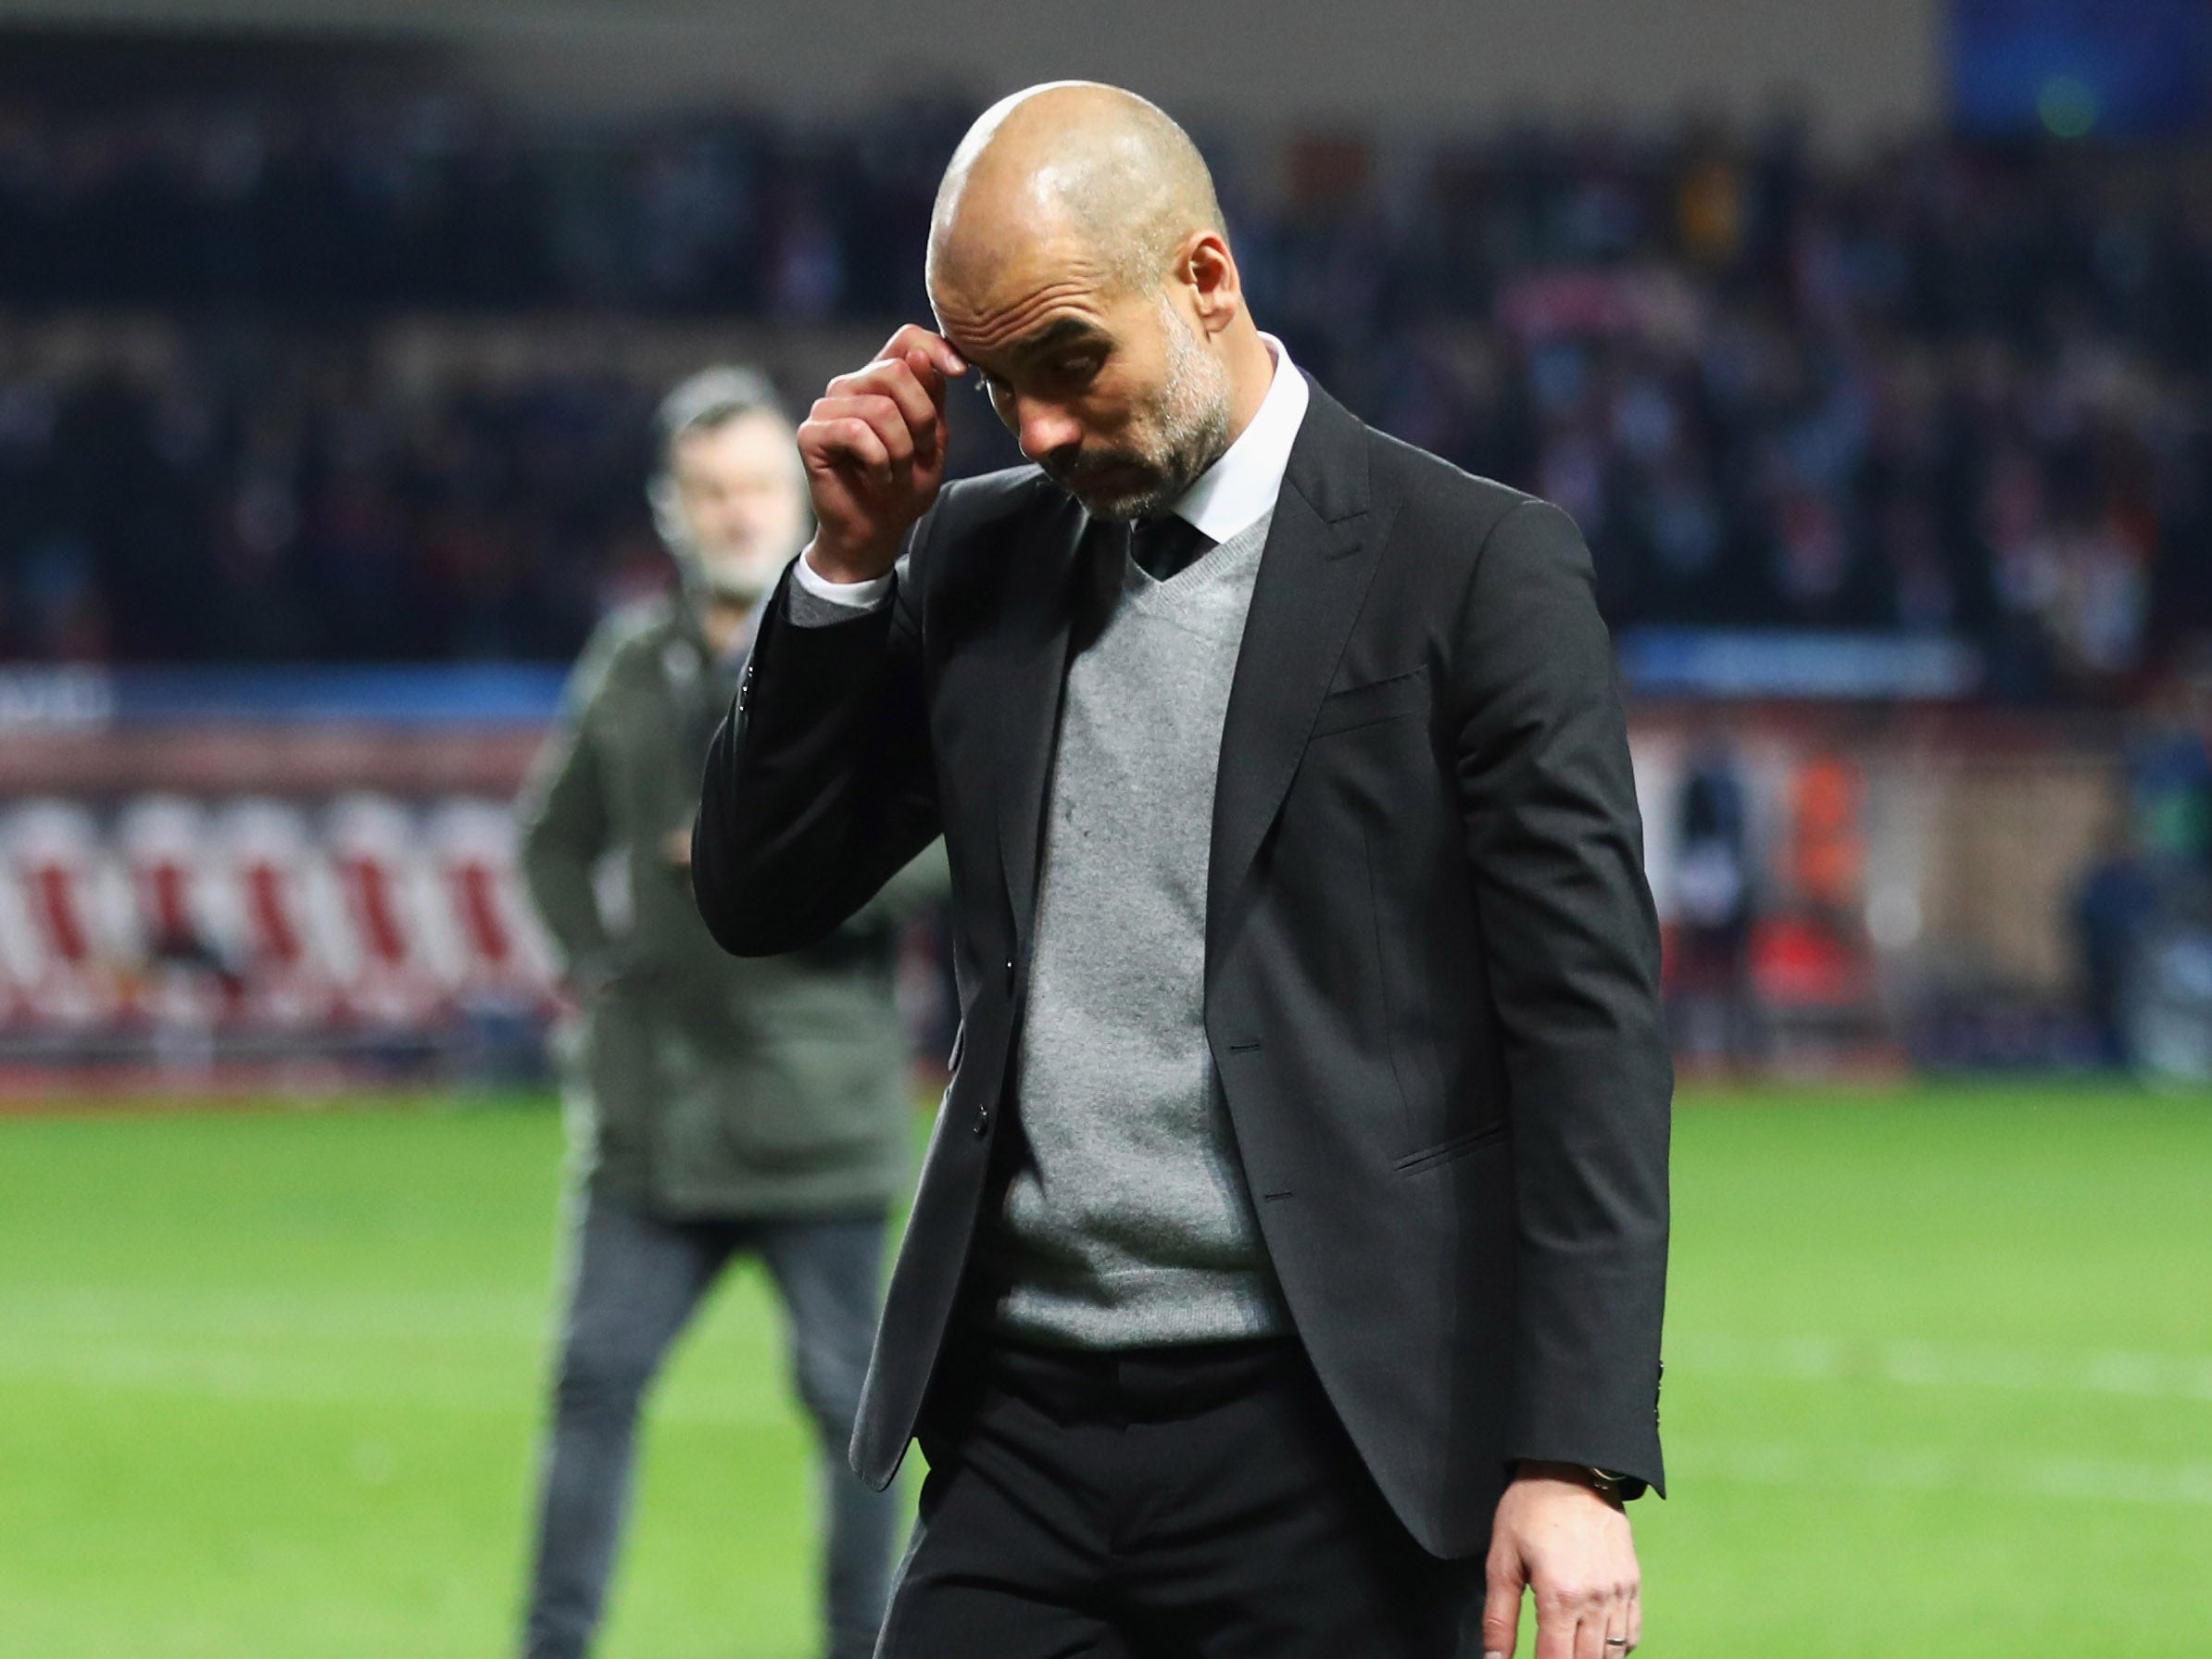 Guardiola was furious with his players after their Champions League exit in Monaco